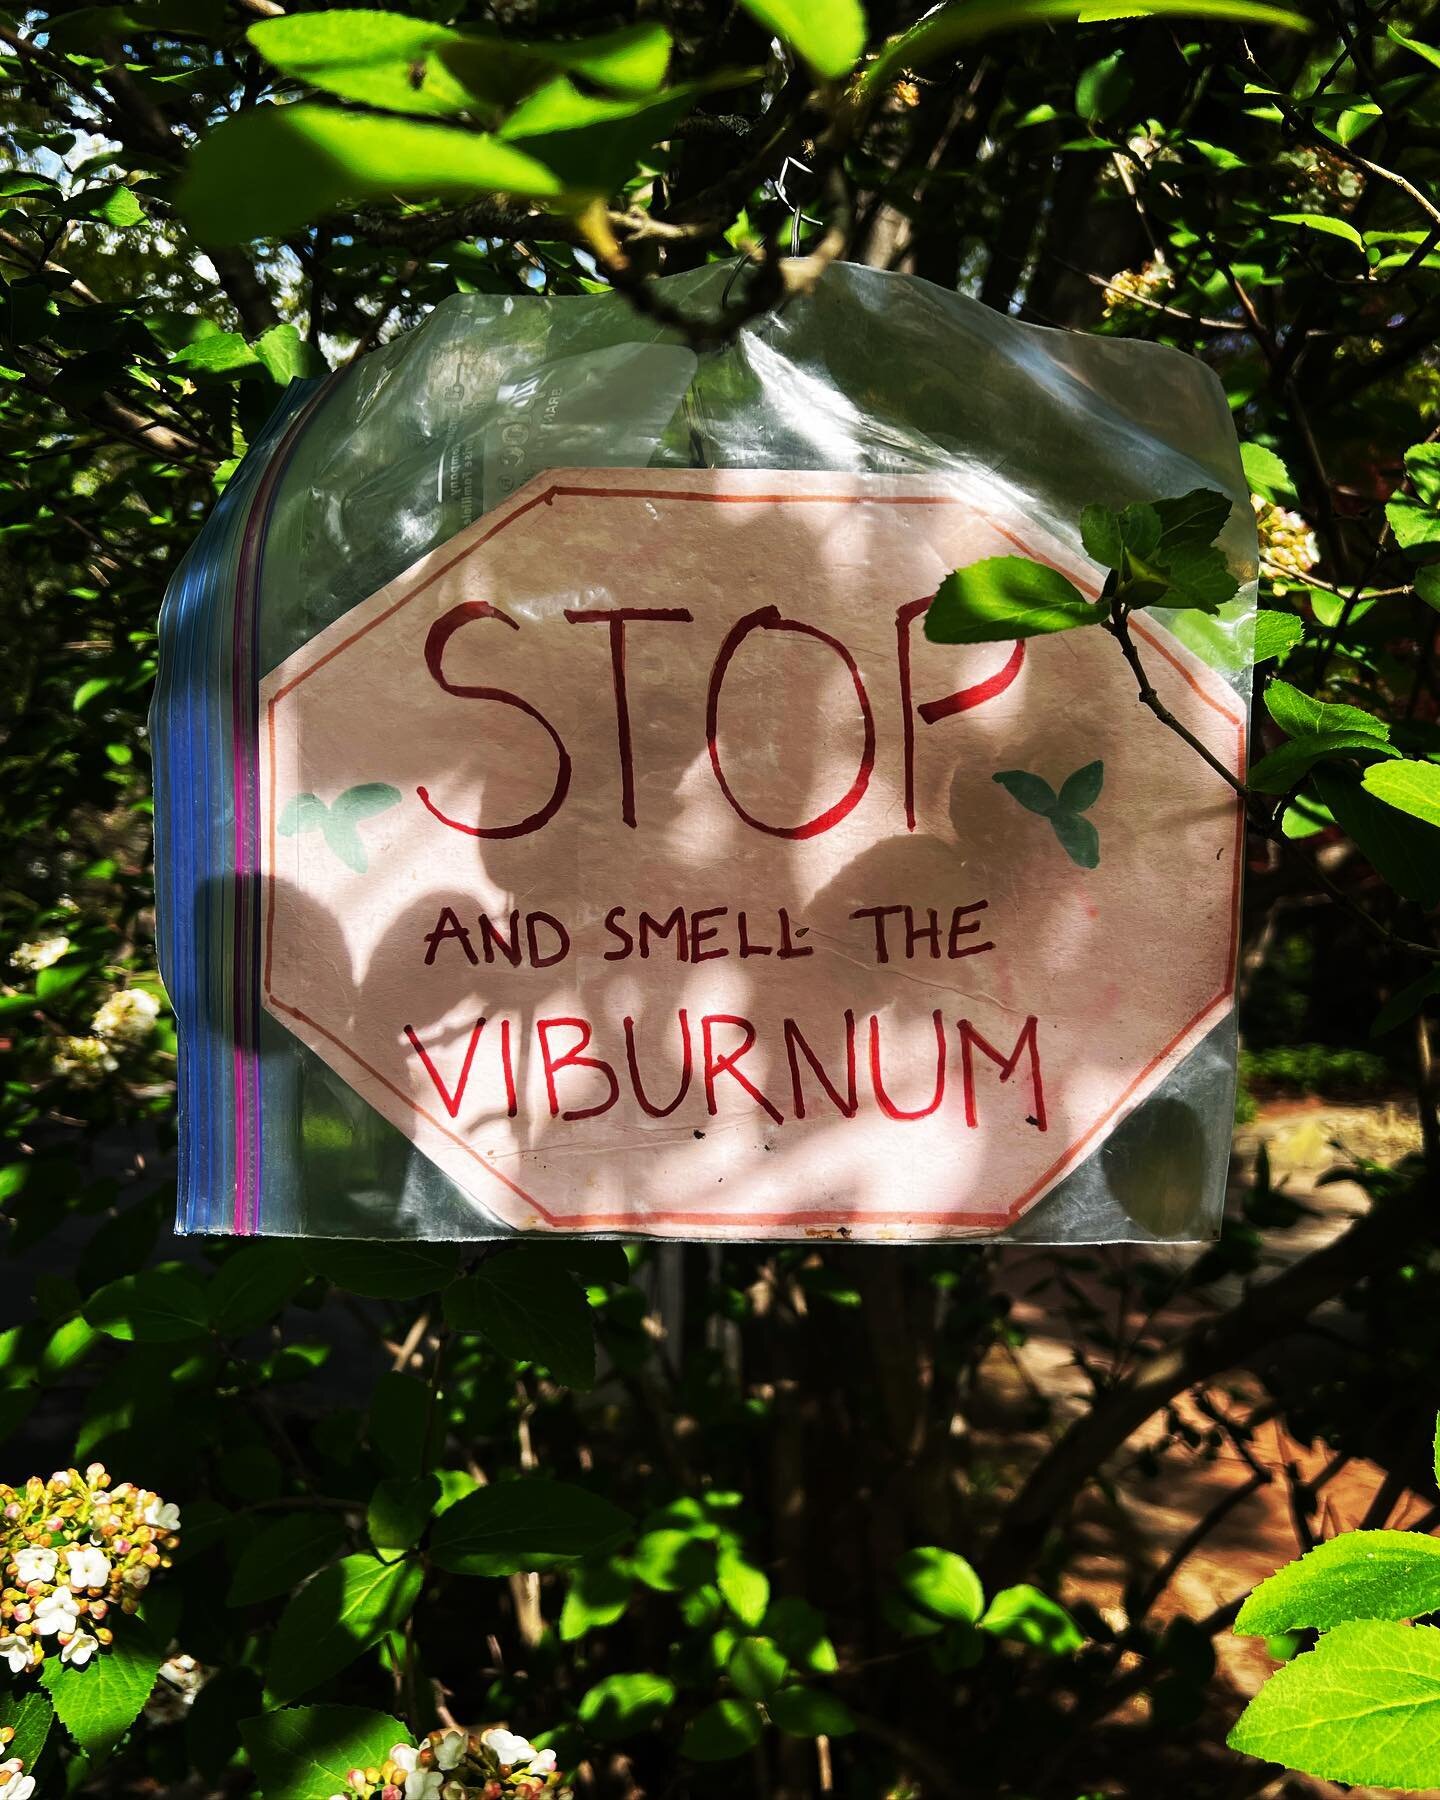 My favorite neighborhood sign of spring &mdash; comes out every year &mdash; and the olfactory-explosive event IS worth stopping for. 

See #viburnum in #williamcarloswilliams where #thepureproductsofamericagocrazy